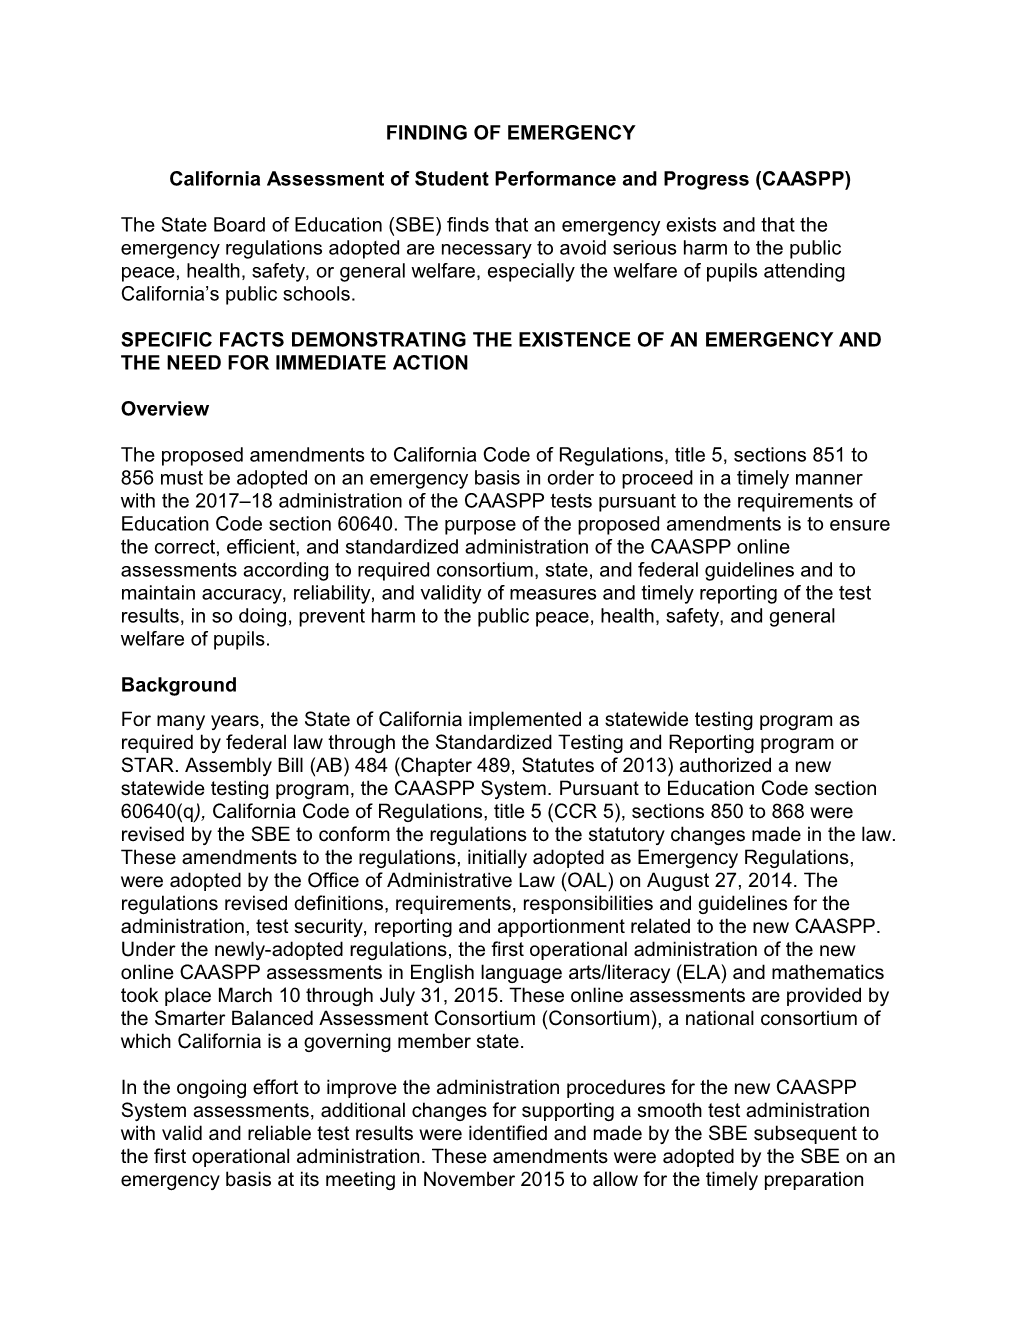 CAASPP 2Nd Readopt Finding of Emergency - Laws & Regulations (CA Dept of Education)